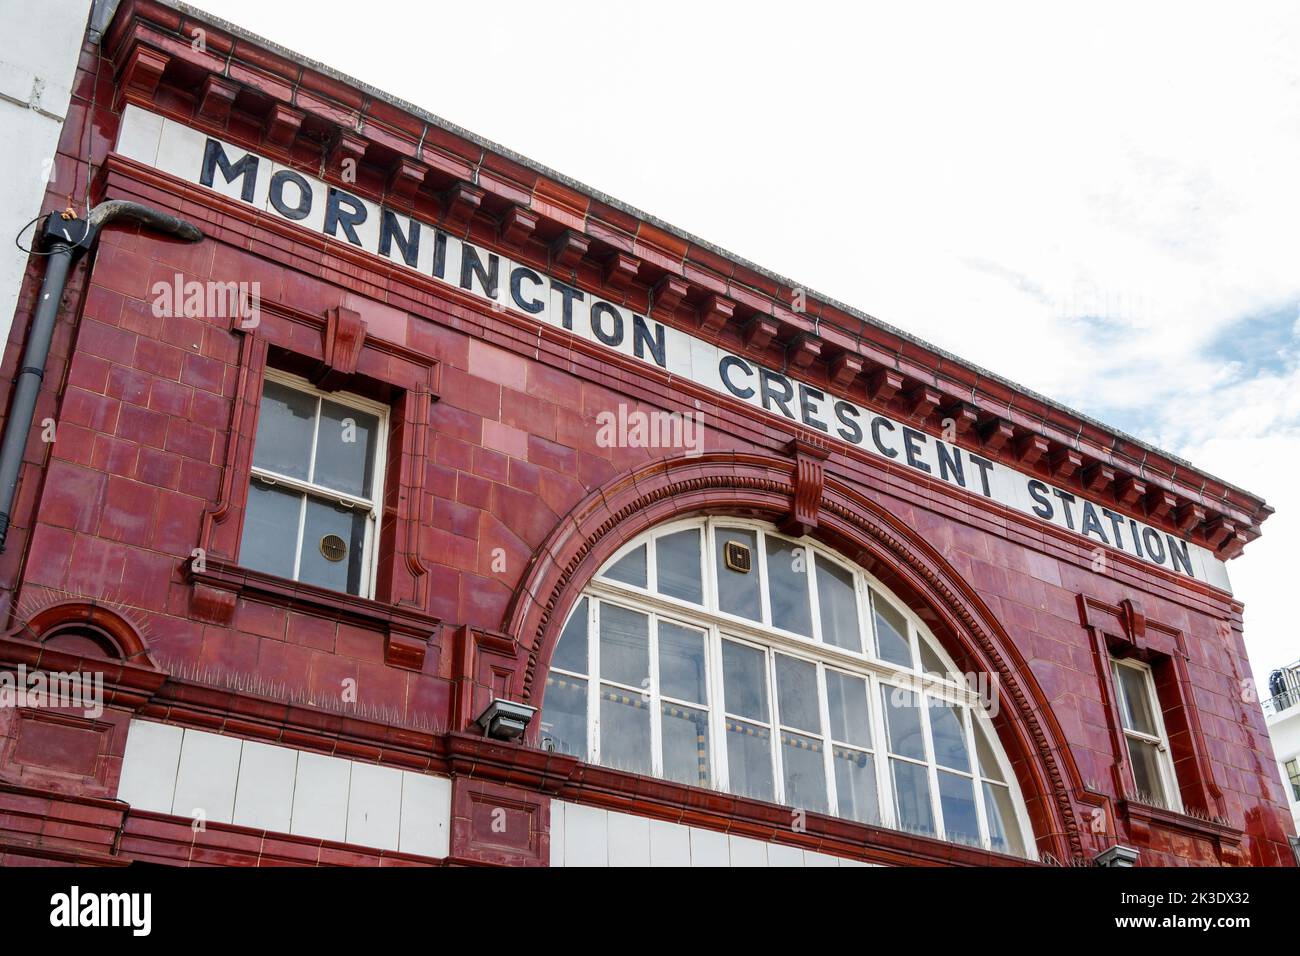 Mornington Crescent underground station on the Northern Line, made famous by the BBC comedy show 'I'm Sorry I haven't a Clue', Camden, London, UK Stock Photo